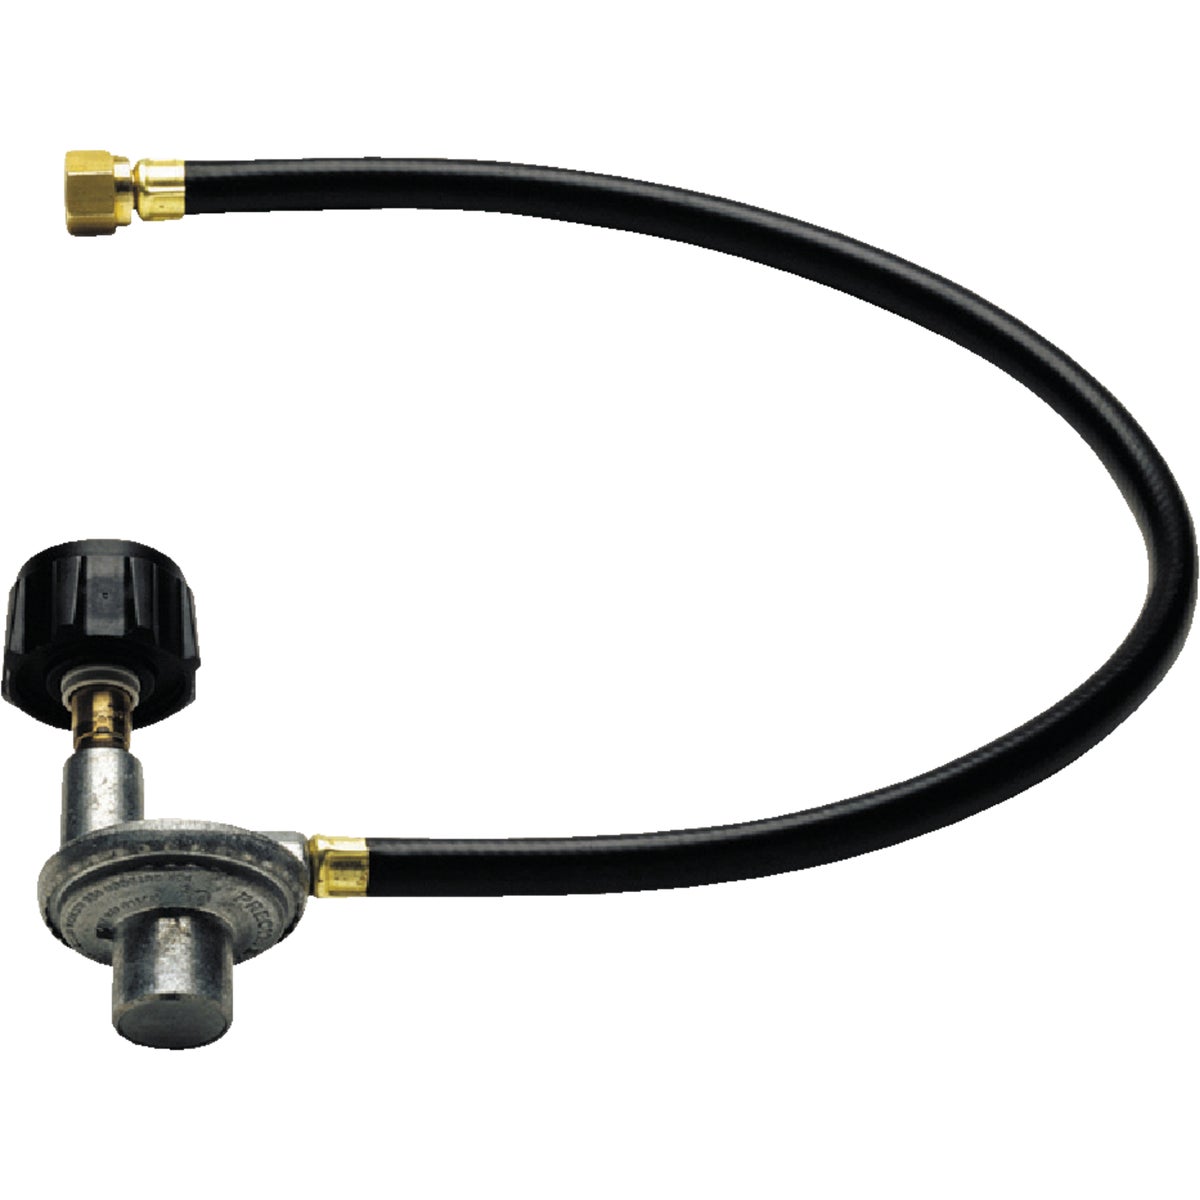 Item 838918, Replacement LP hose and regulator with QCC1 type fitting for 20 Lb.